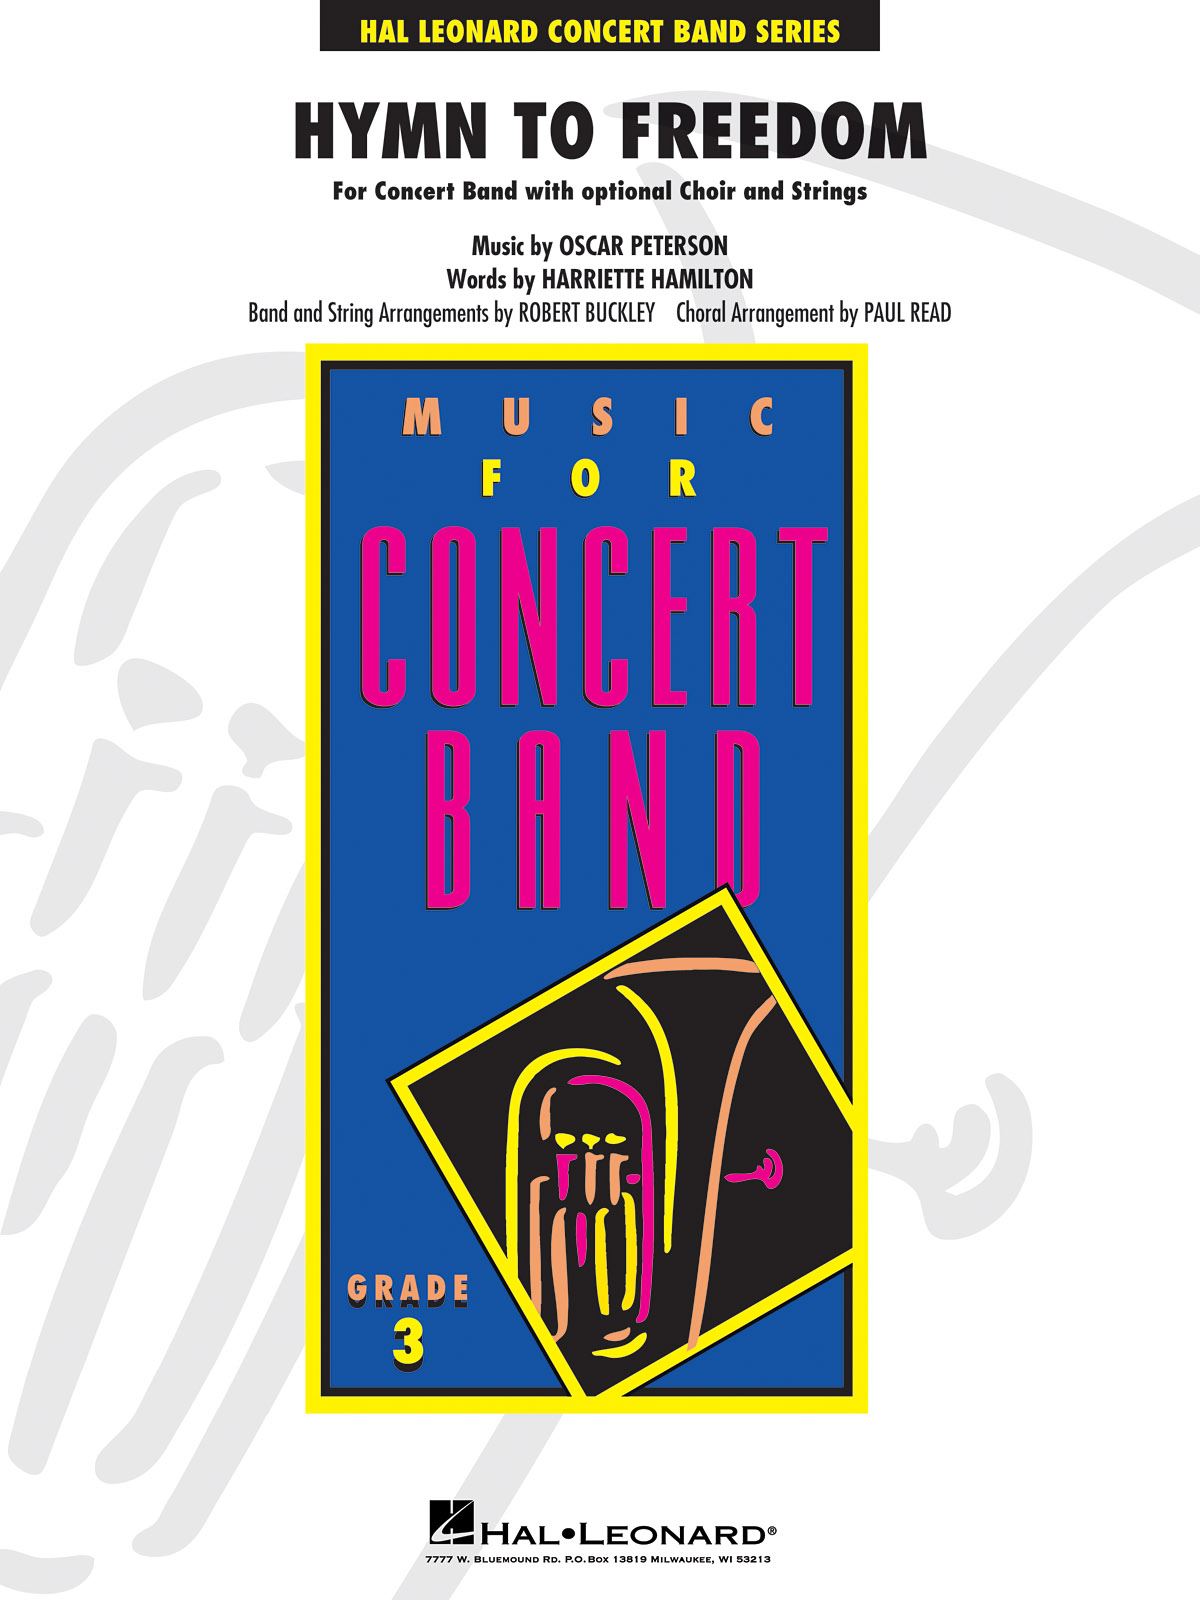 Oscar Peterson: Hymn to Freedom: Concert Band: Score